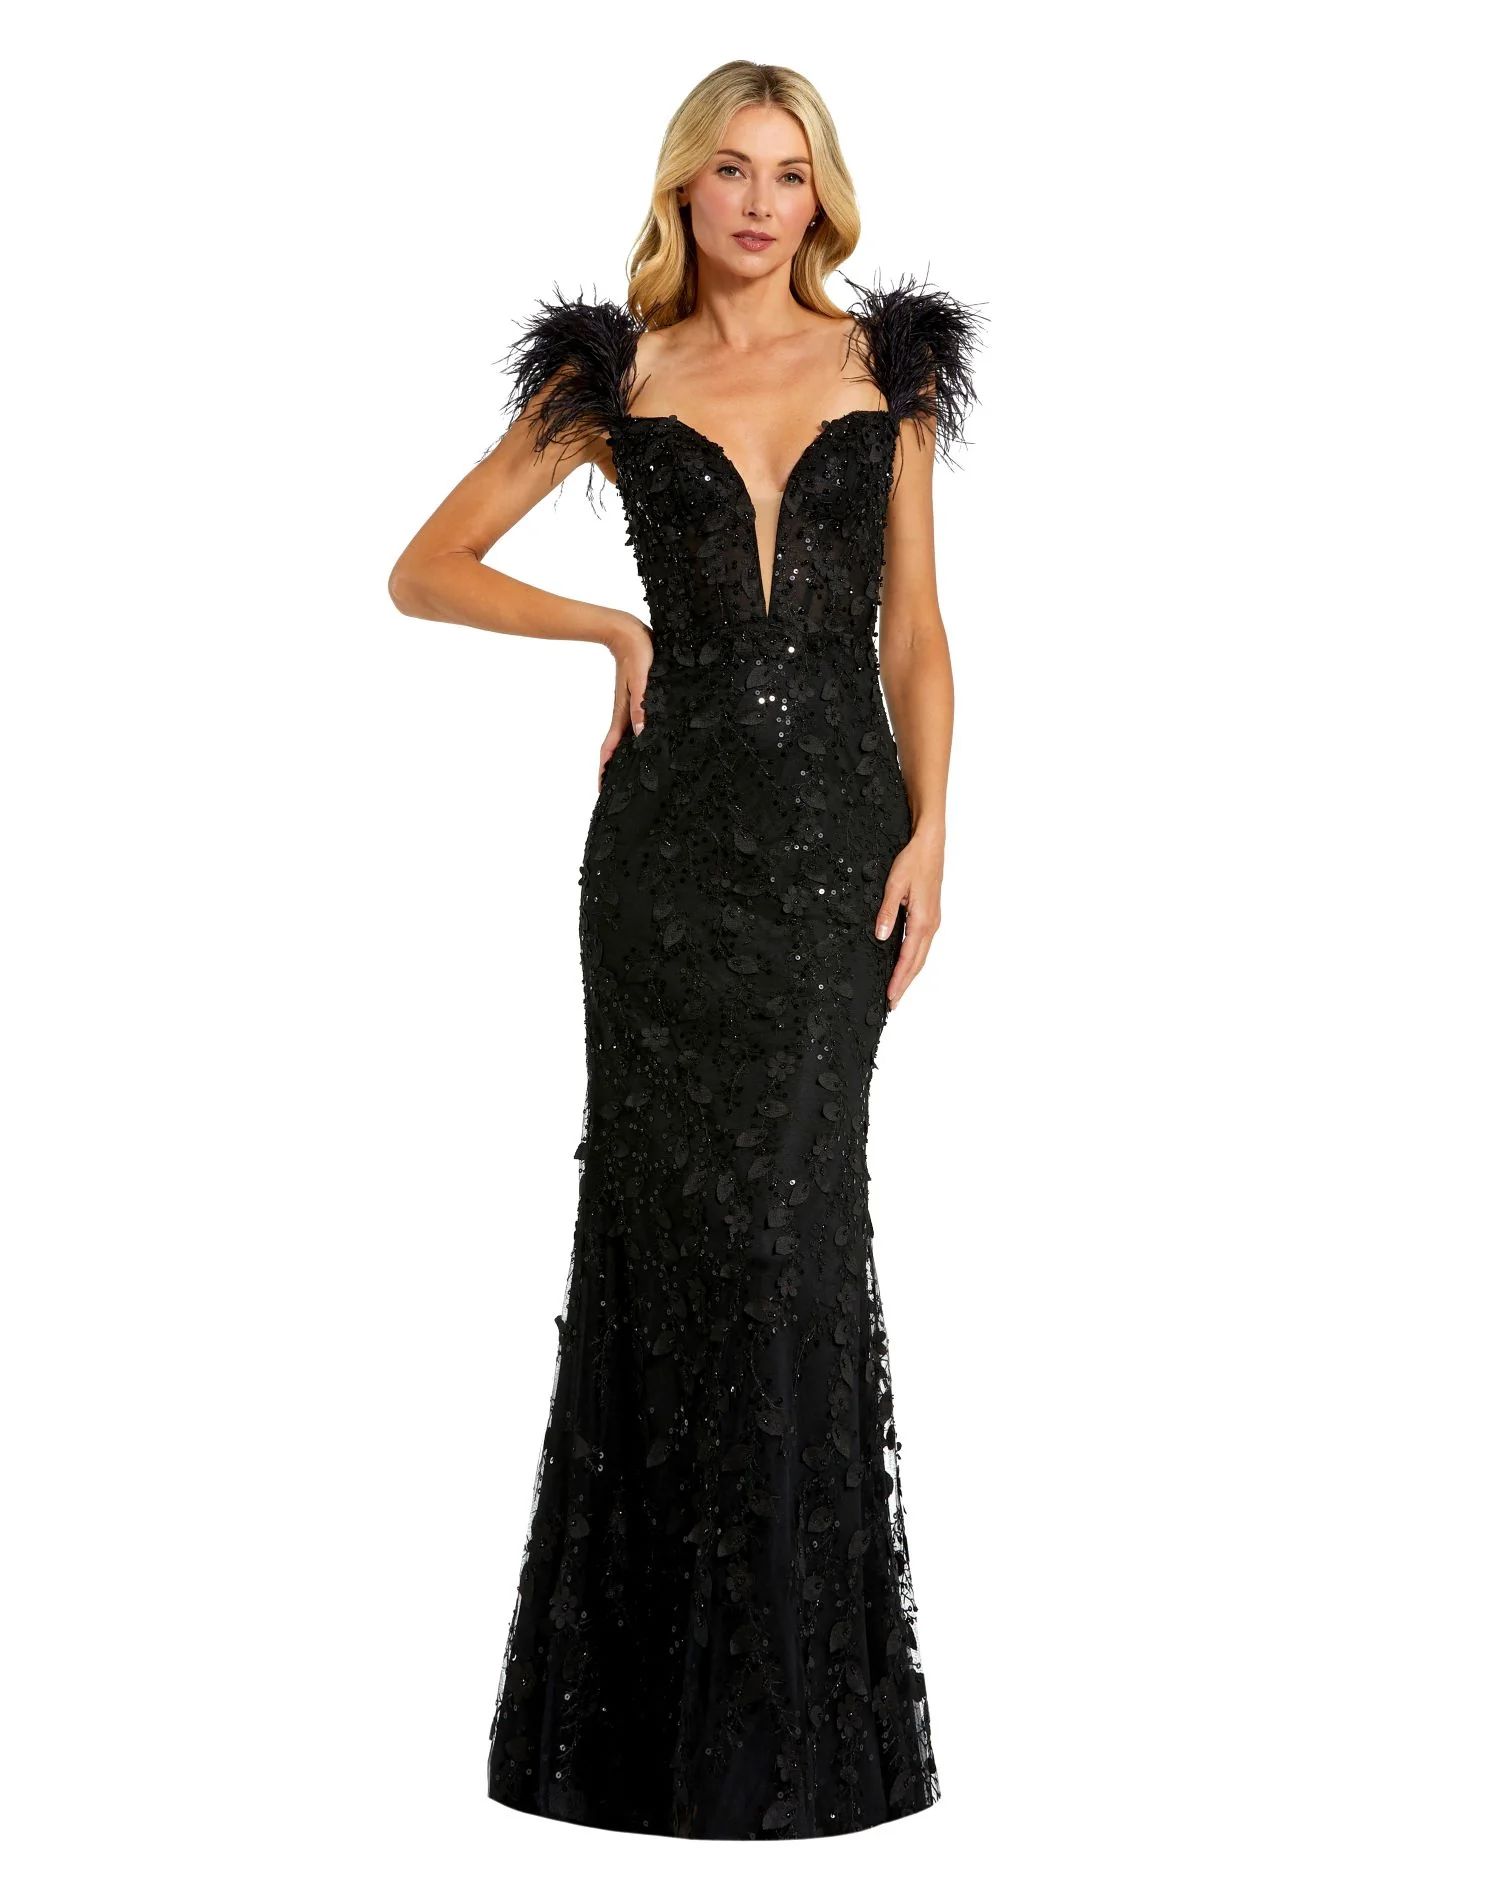 Sheer Applique Bustier Gown with Feather Straps | Mac Duggal